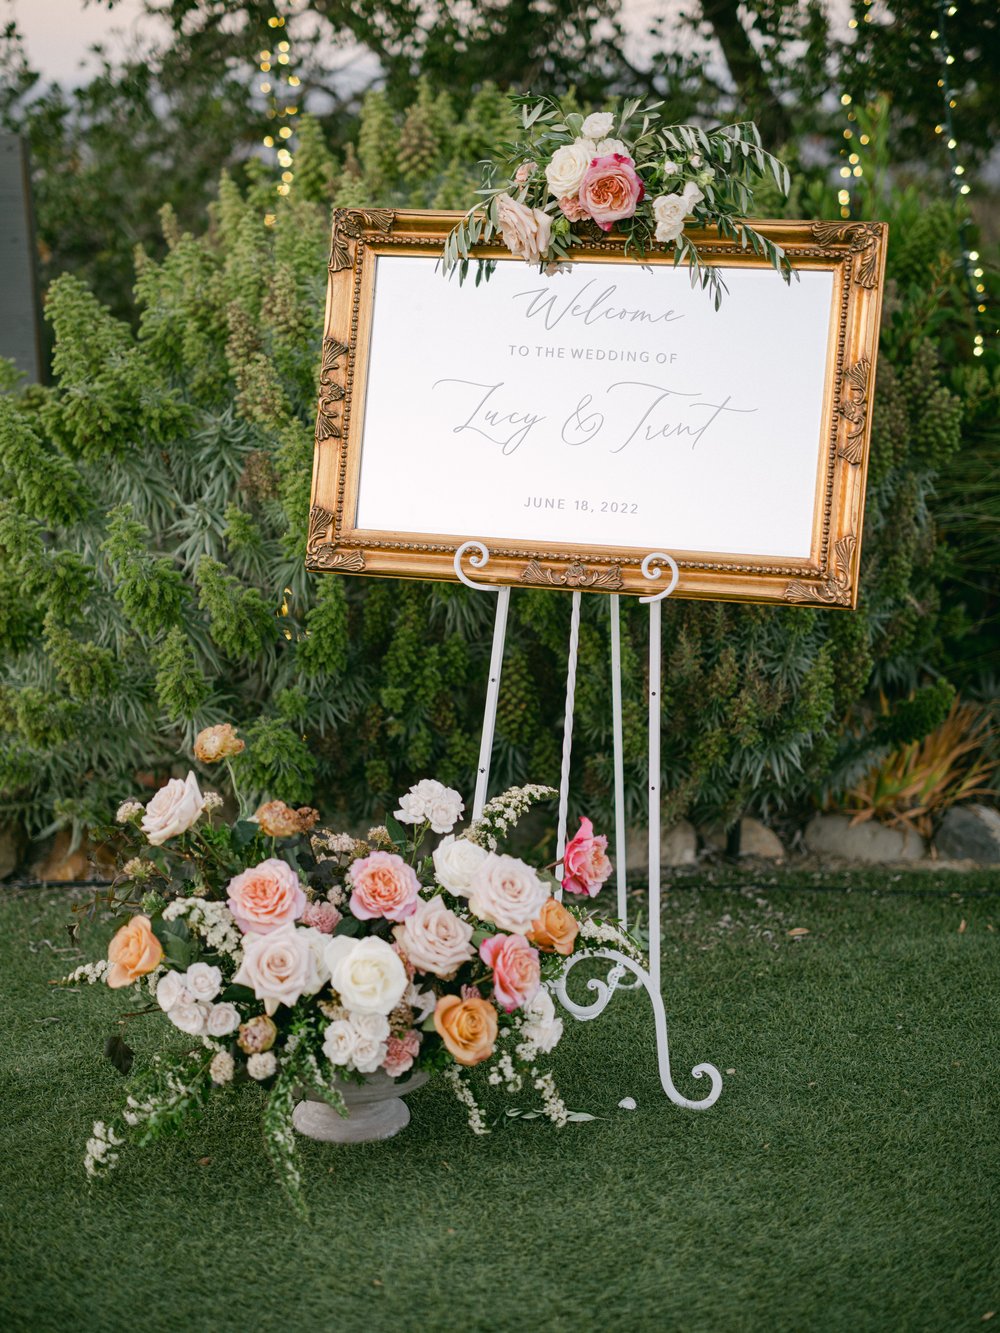 Wedding reception seating chart sign with pink and orange floral sprays.